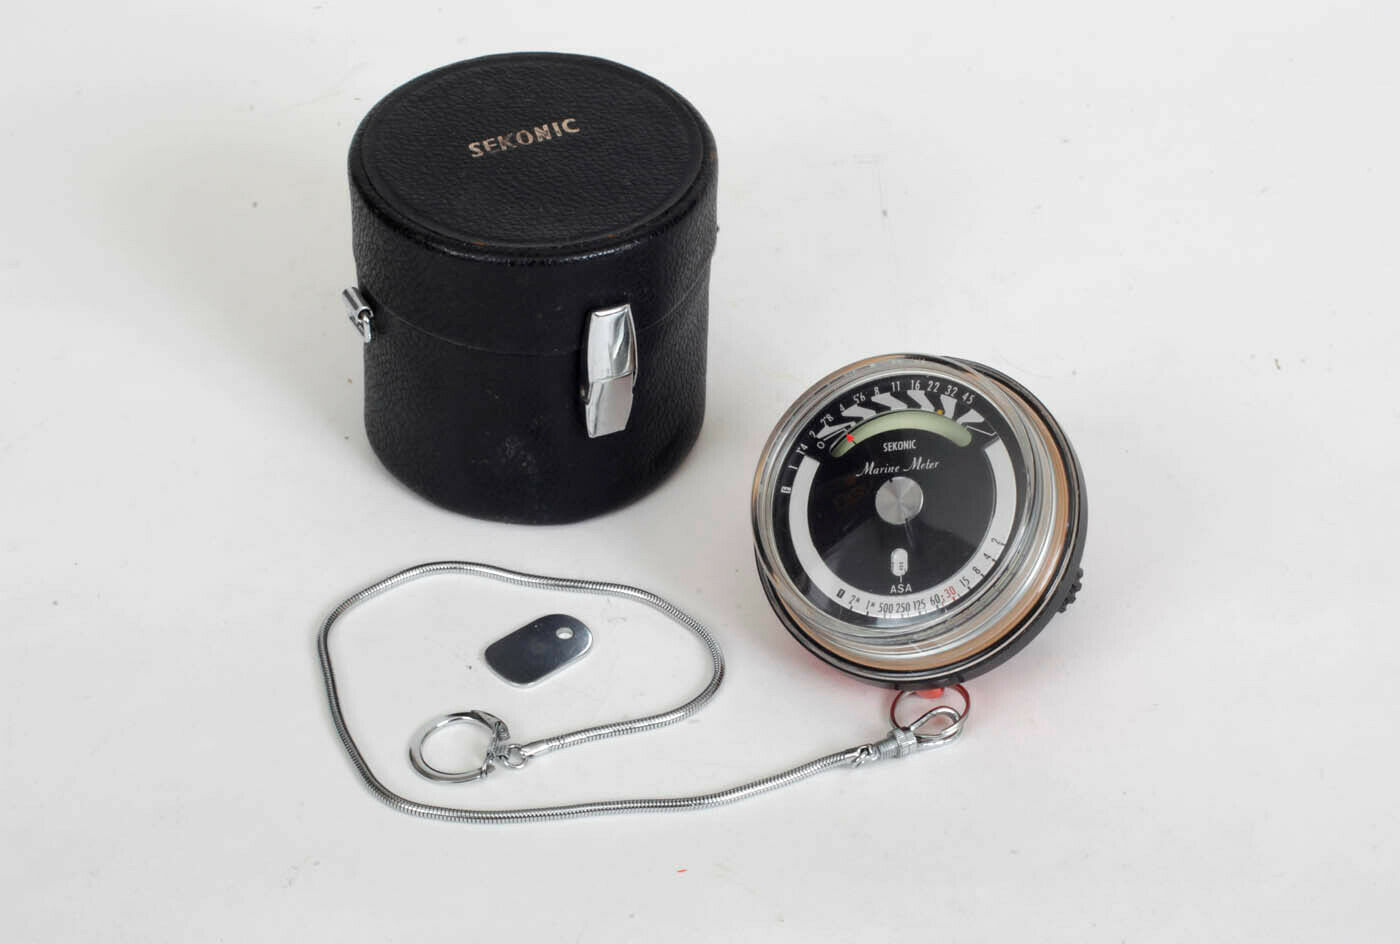 Sekonic Marine Meter With Original Case And Tether Chain - Series I Light Meter